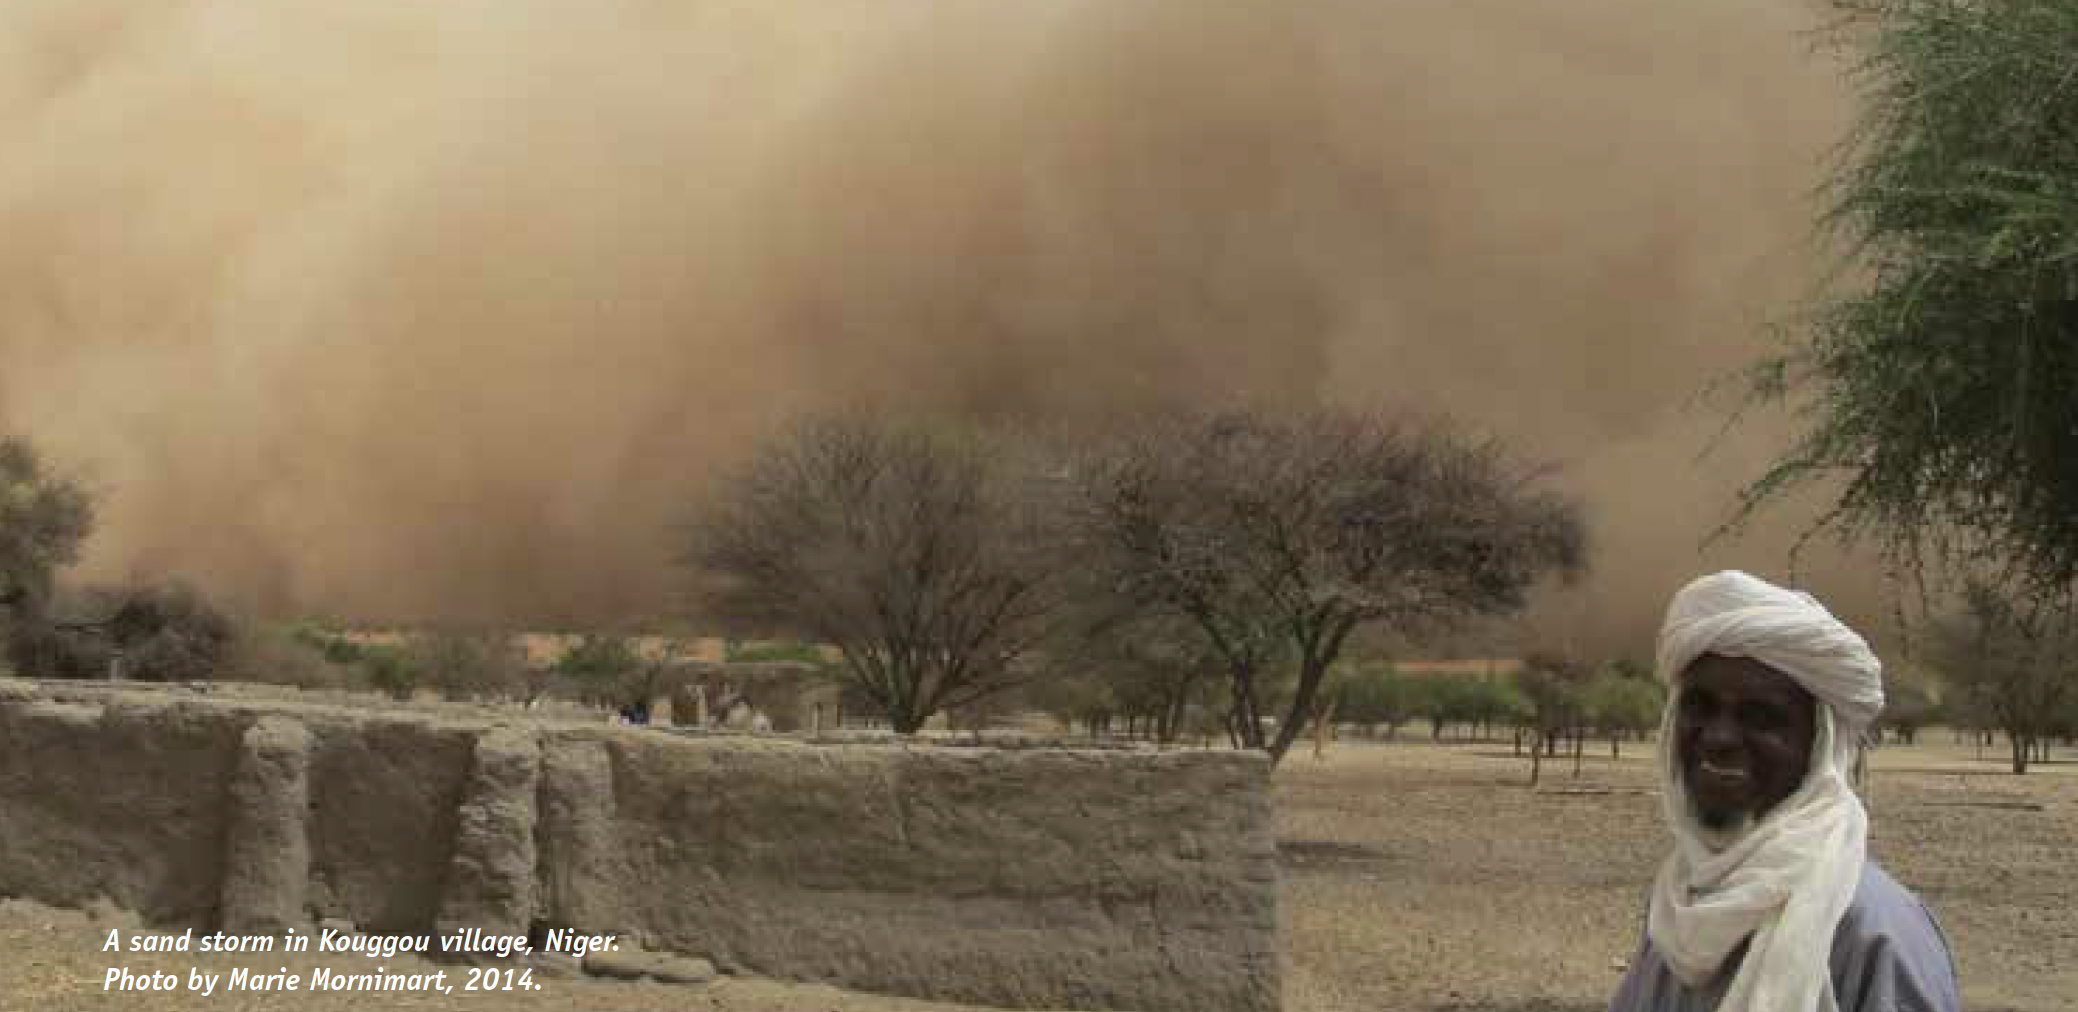 A sand storm in Kouggou village, Niger. Photo by Marie Mornimart, 2014.